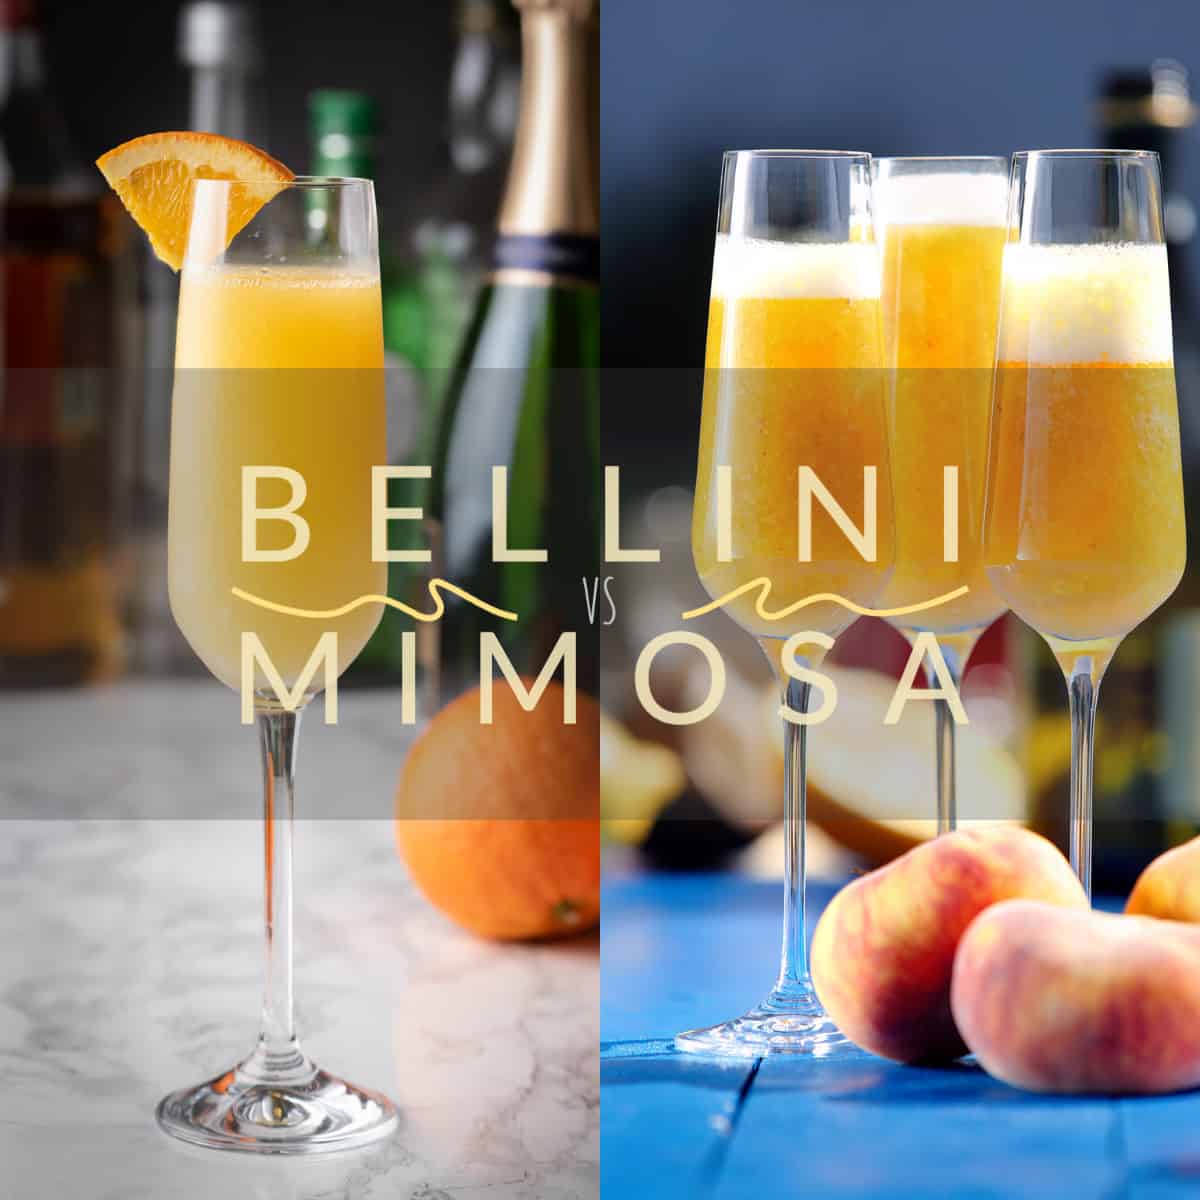 featured image of a Bellini next to a Mimosa